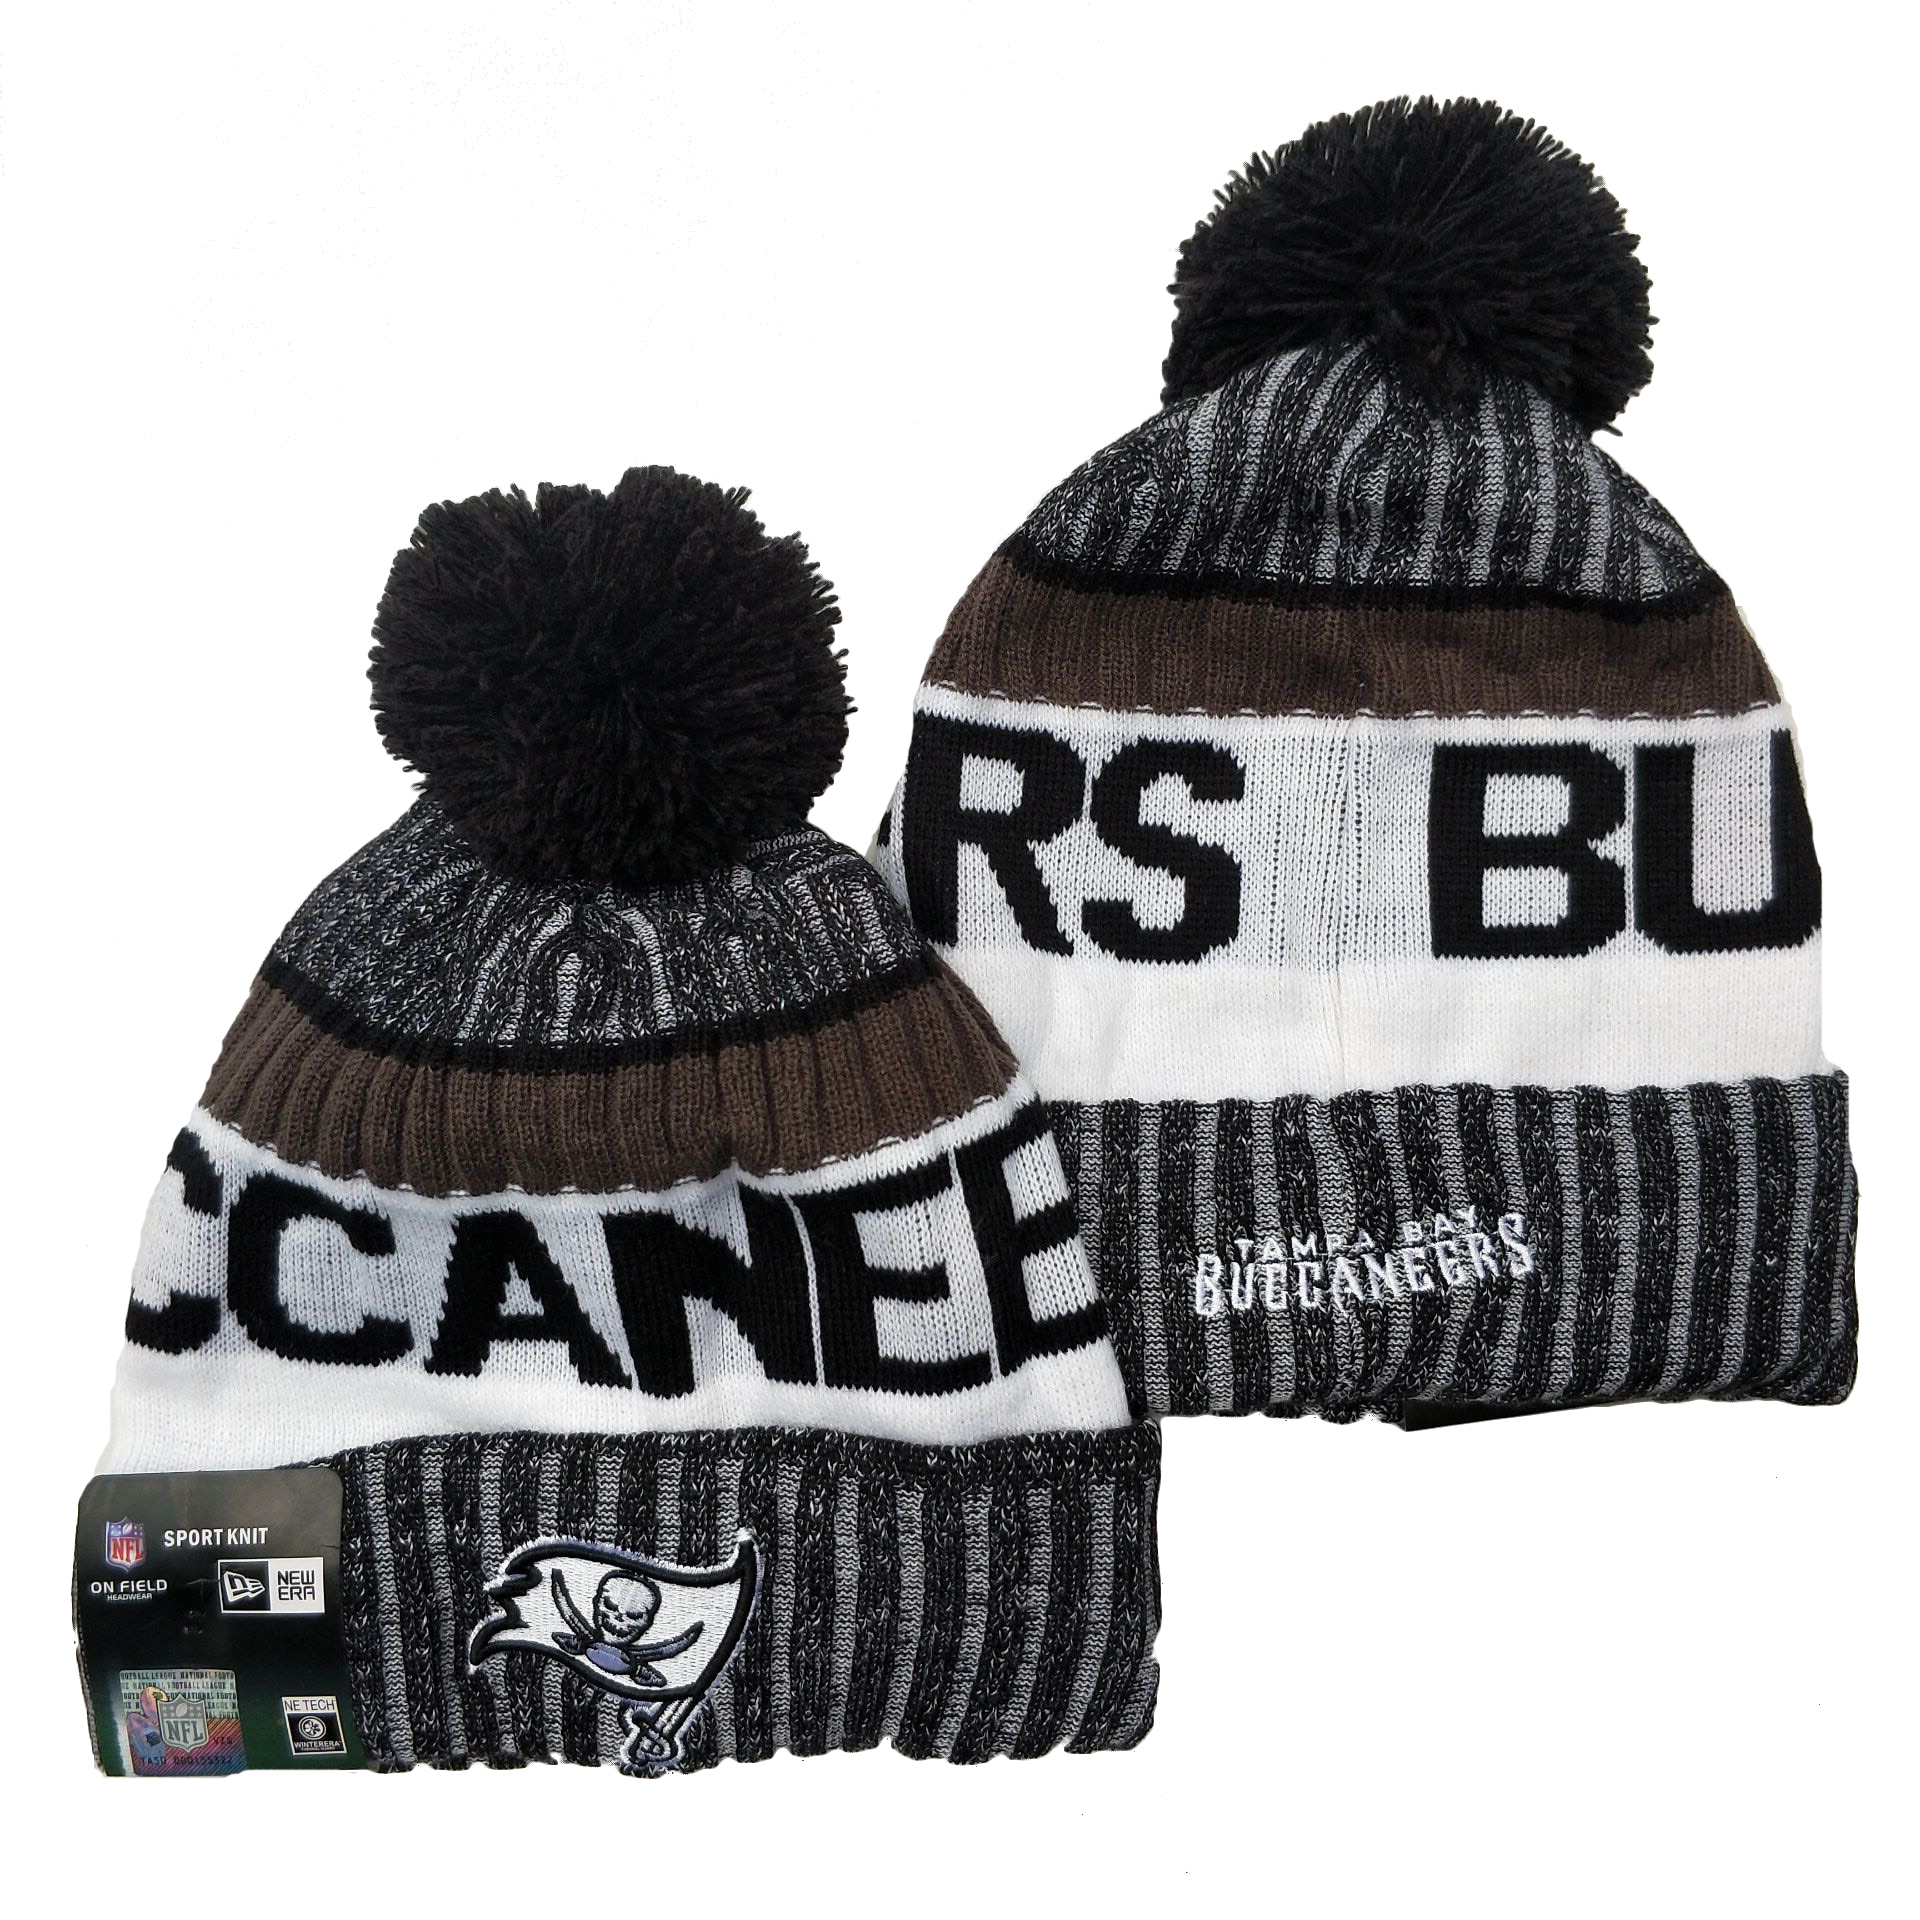 Tampa Bay Buccaneers Knit Hats 039